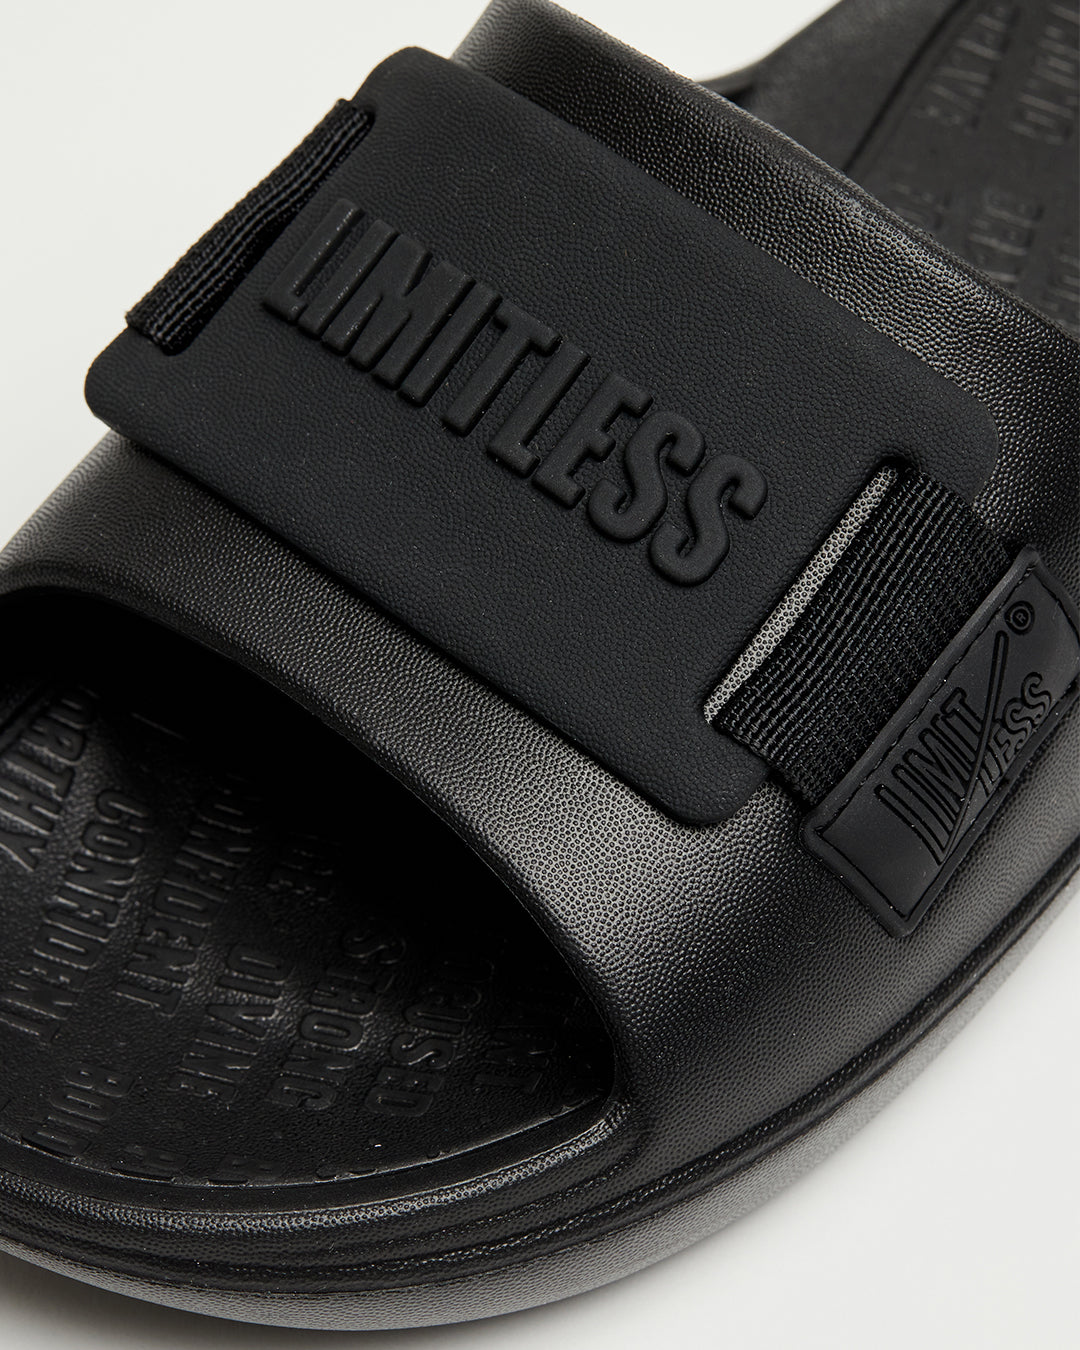 LIMITLESS SLIDES™ WITH ESSENTIAL TIBAH™ QUAD - EASTERN HIGH SCHOOL EDITION